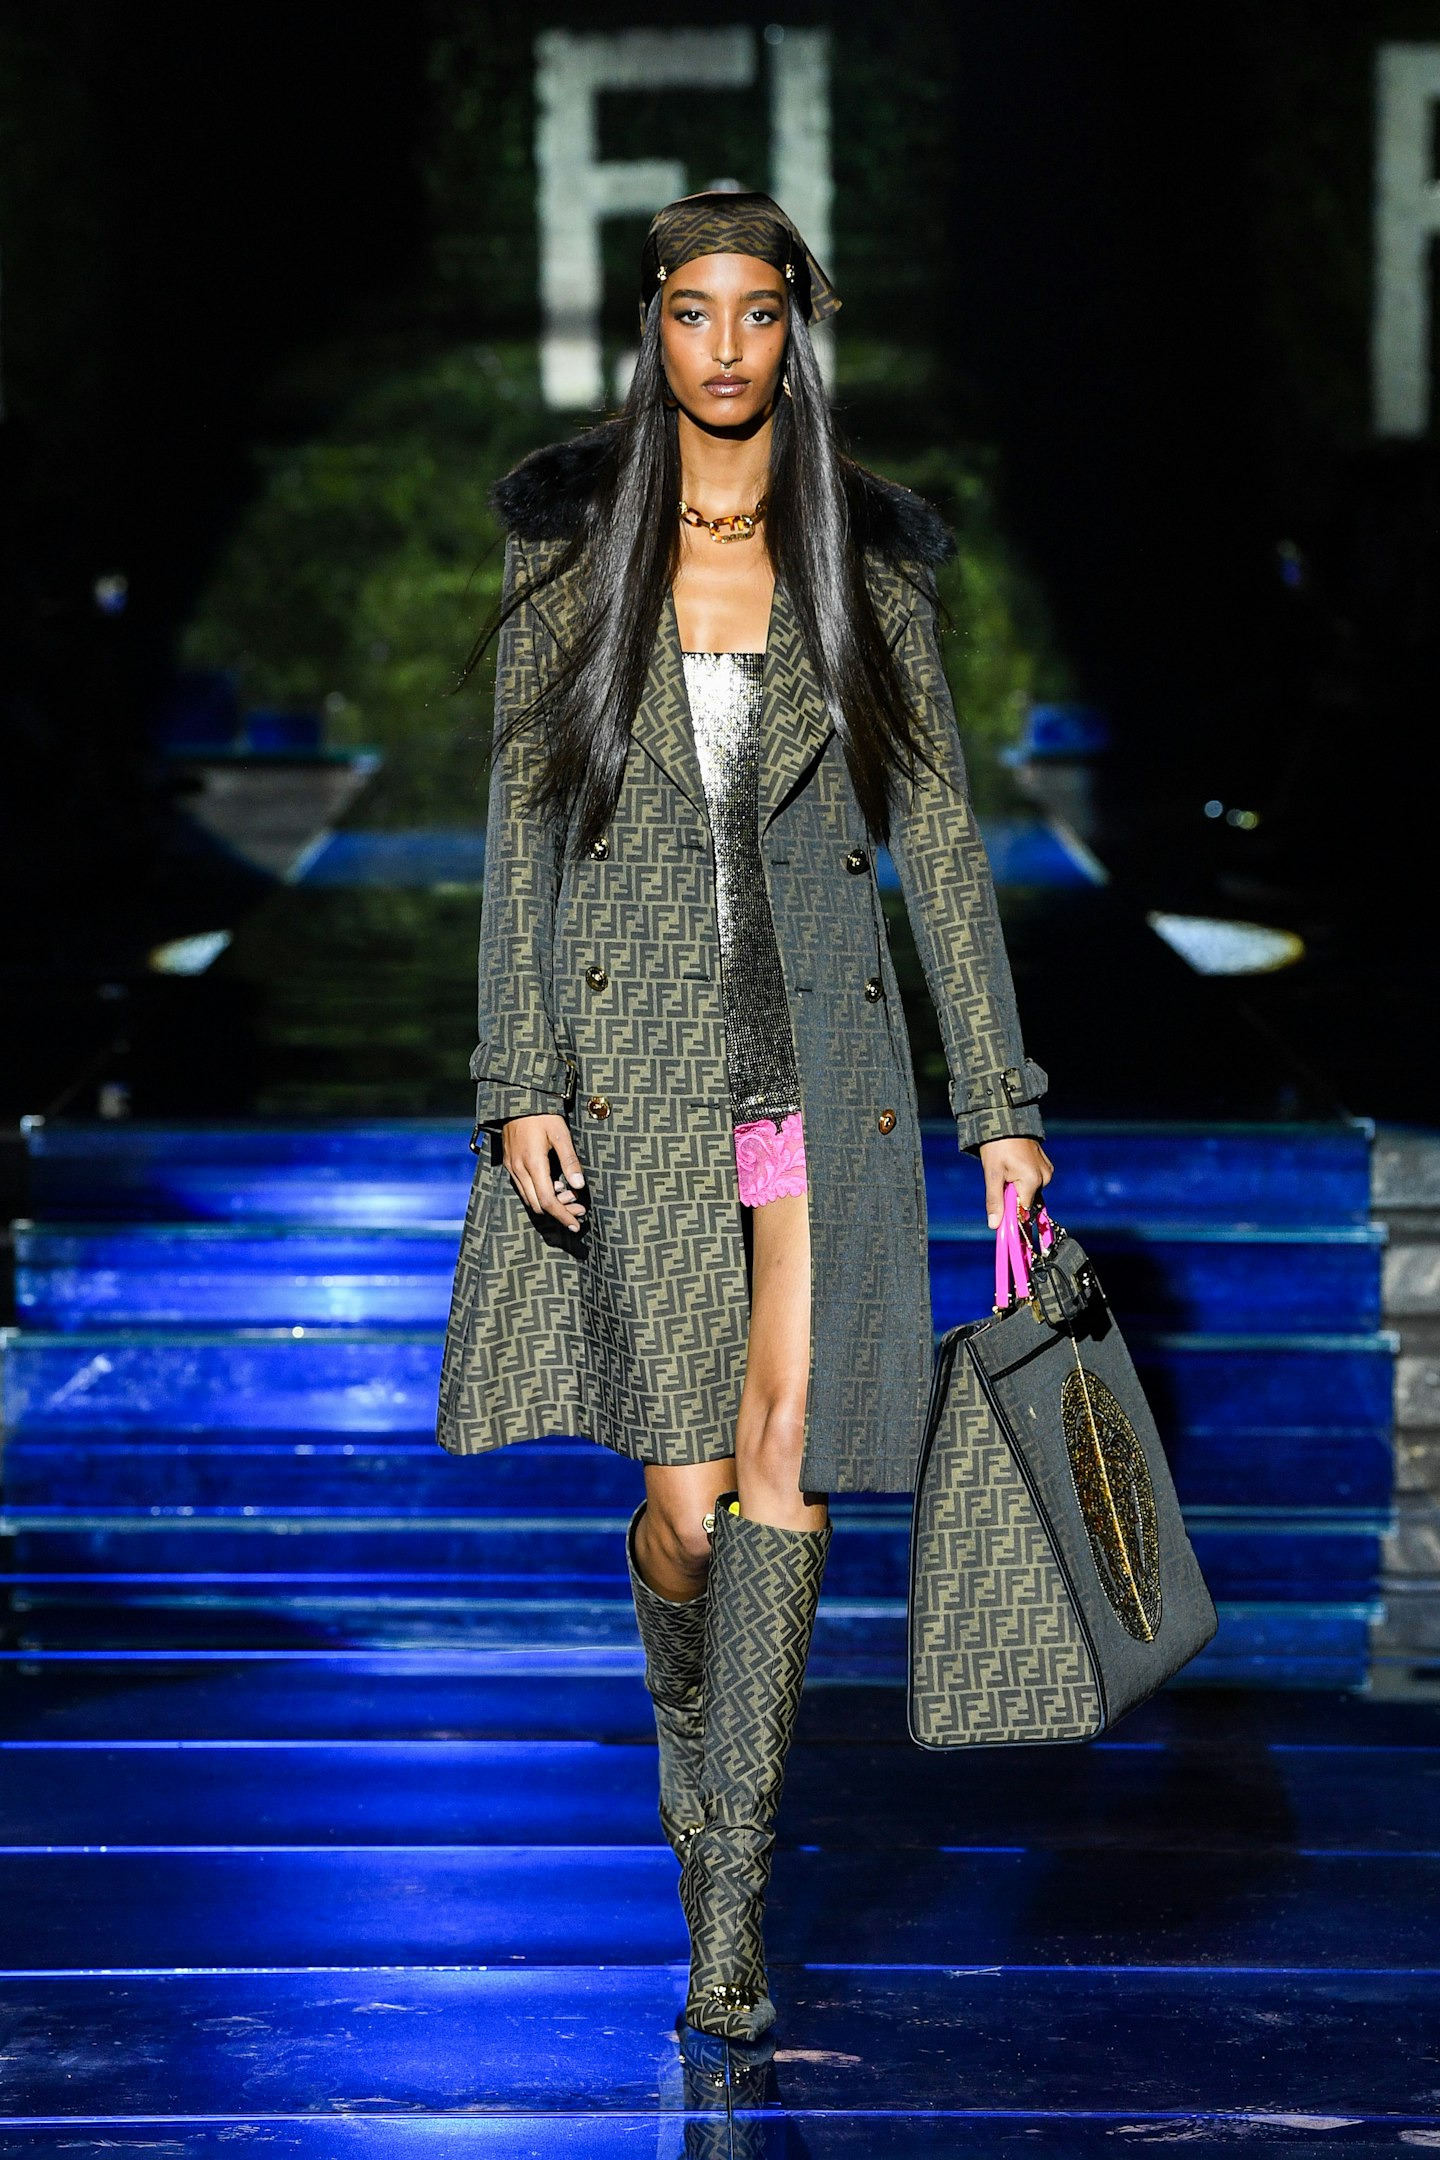 A model on the catwalk at Fendi by Versace